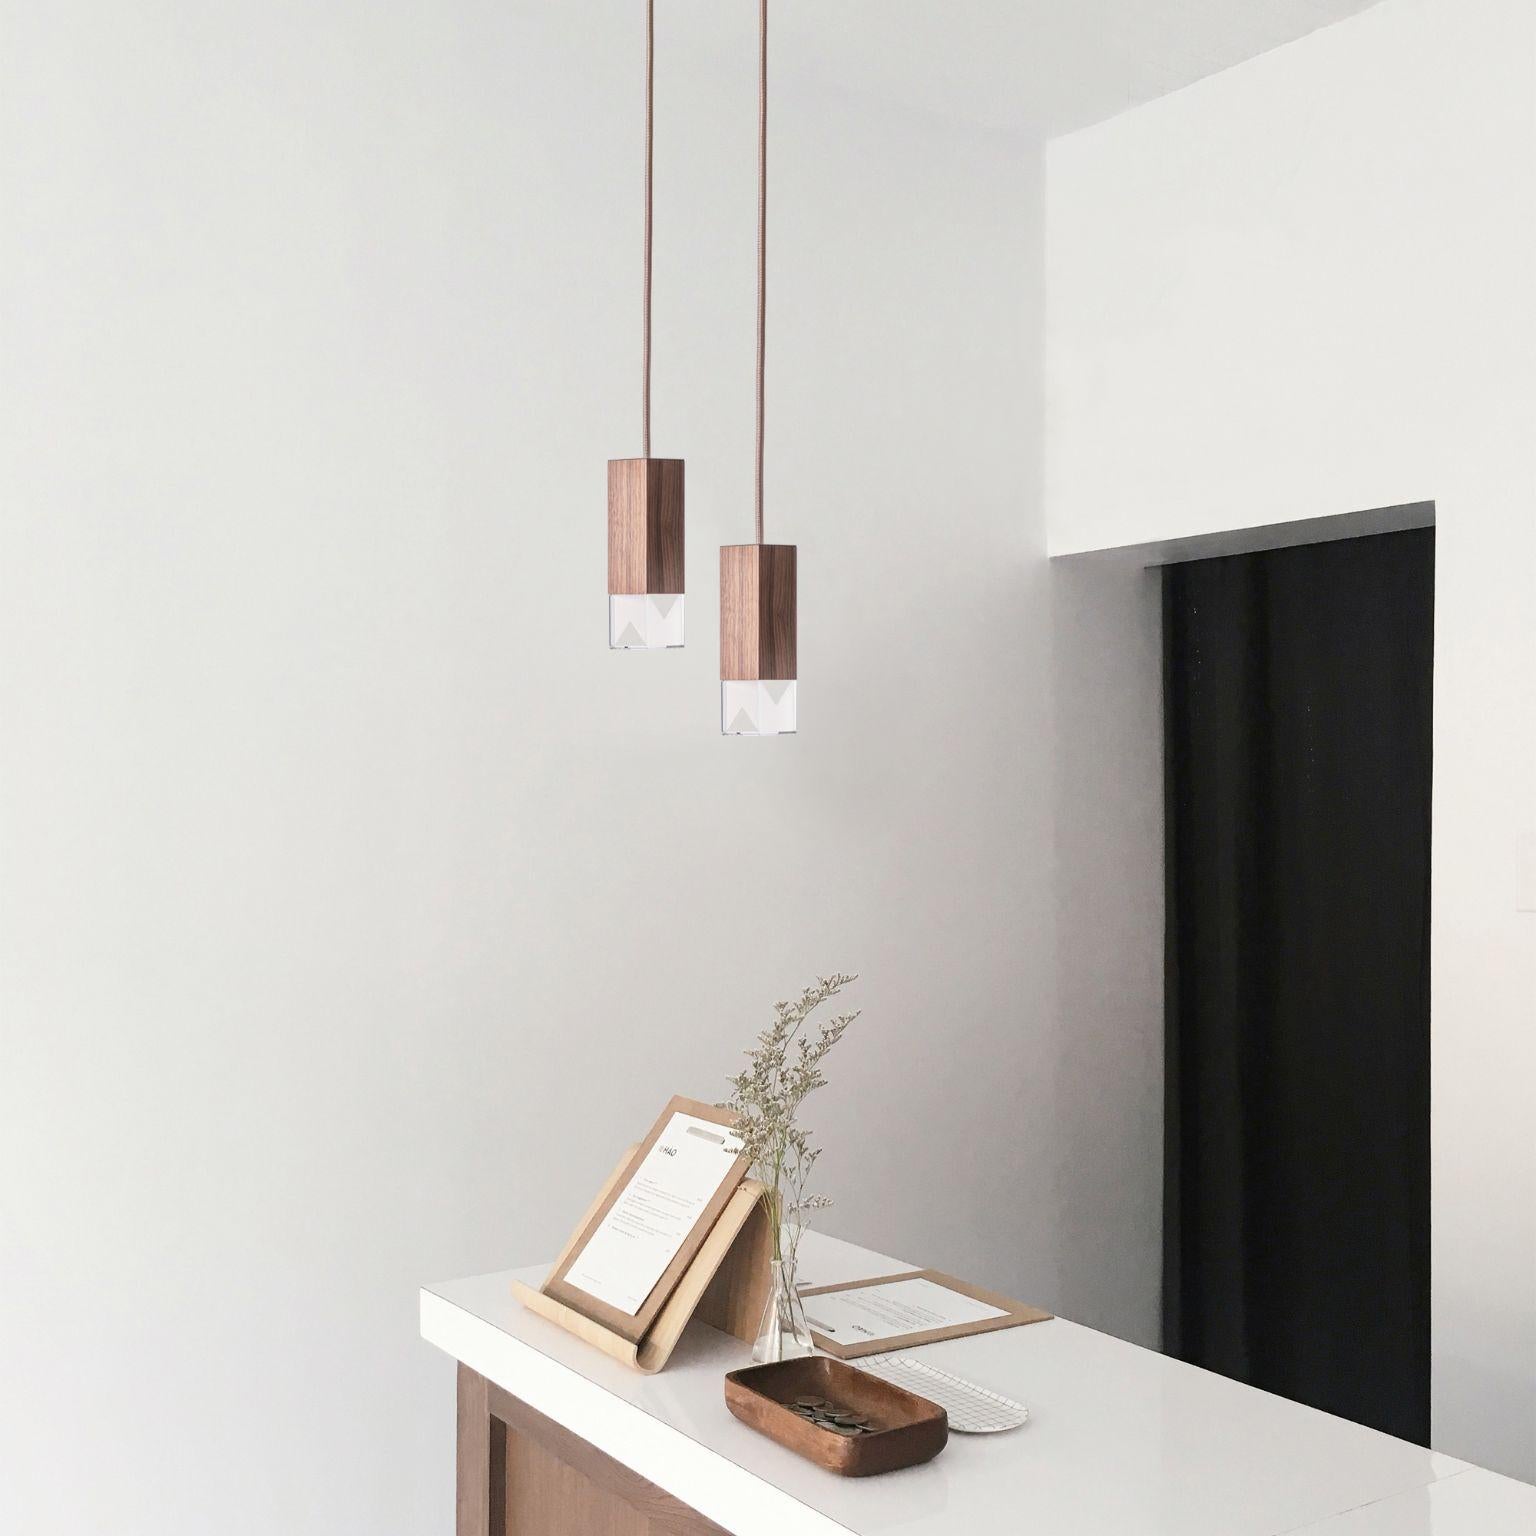 Other Lamp One Wood Duet Chandelier by Formaminima